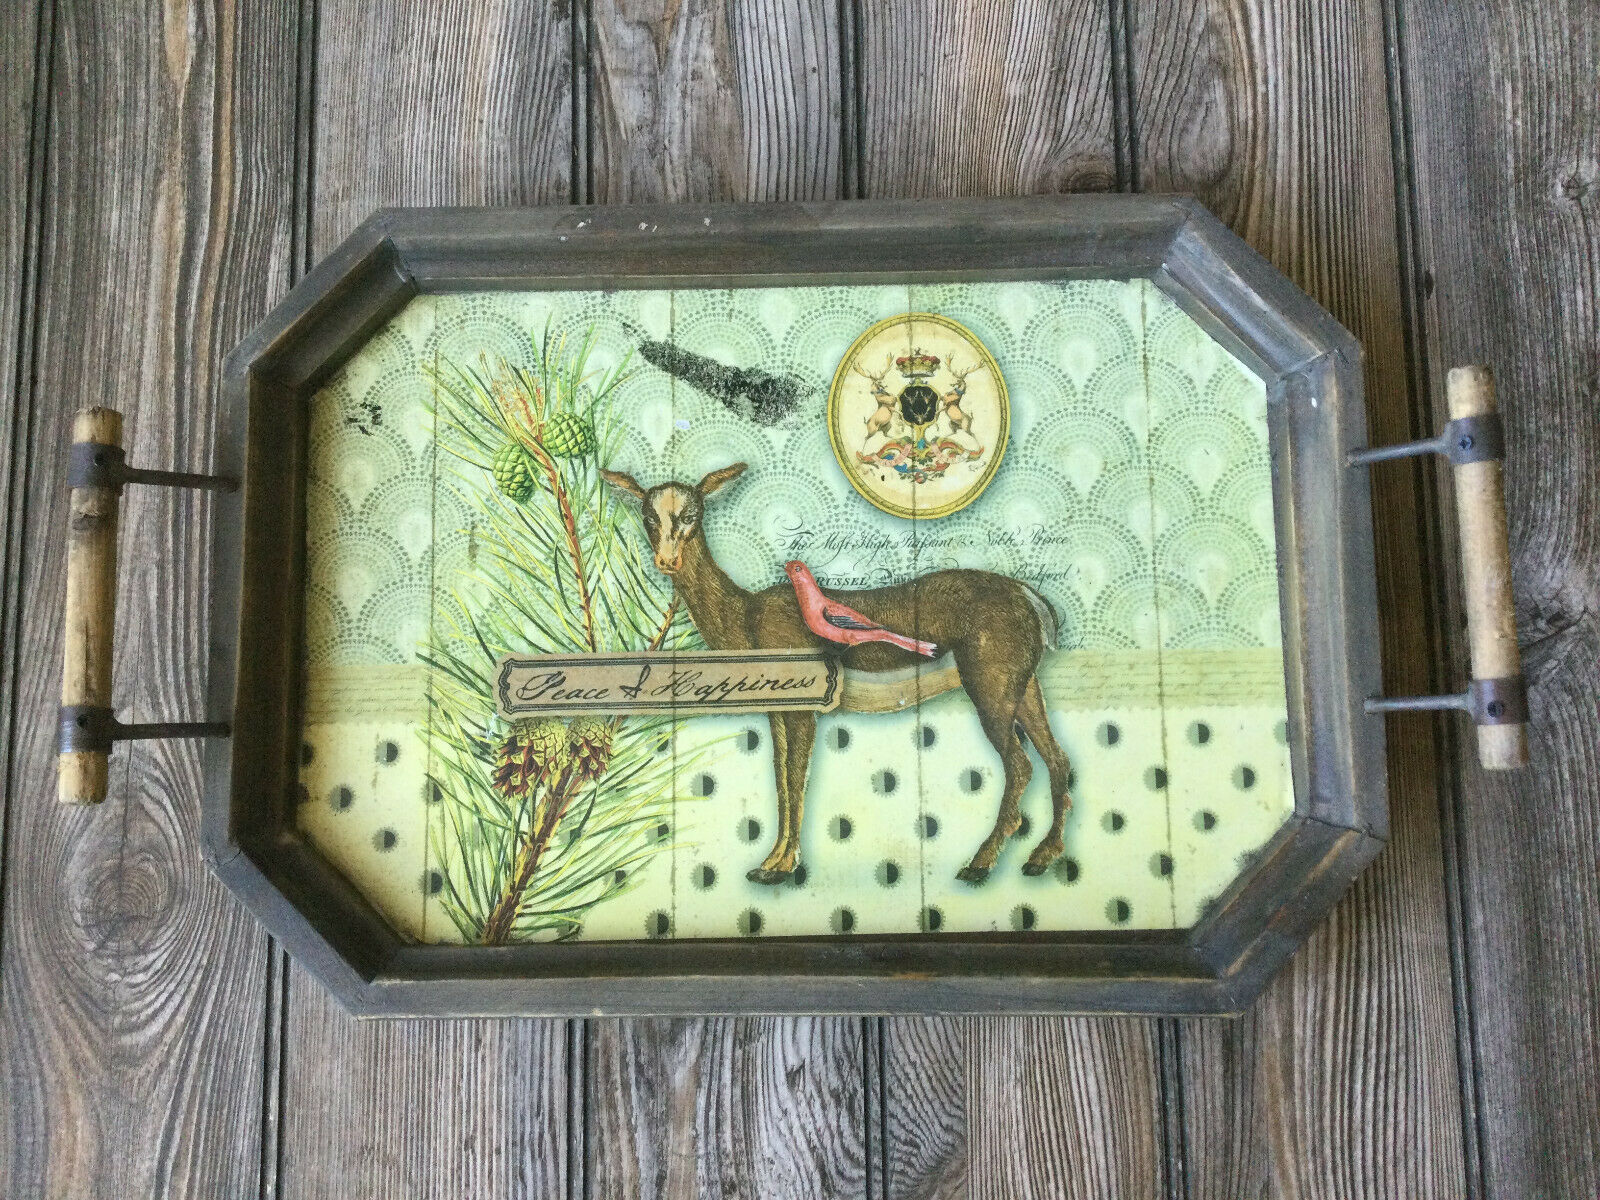 Williamsburg Creative Co-op Wooden Metal Serving Tray Wall Decor (Torn paper) - $9.39